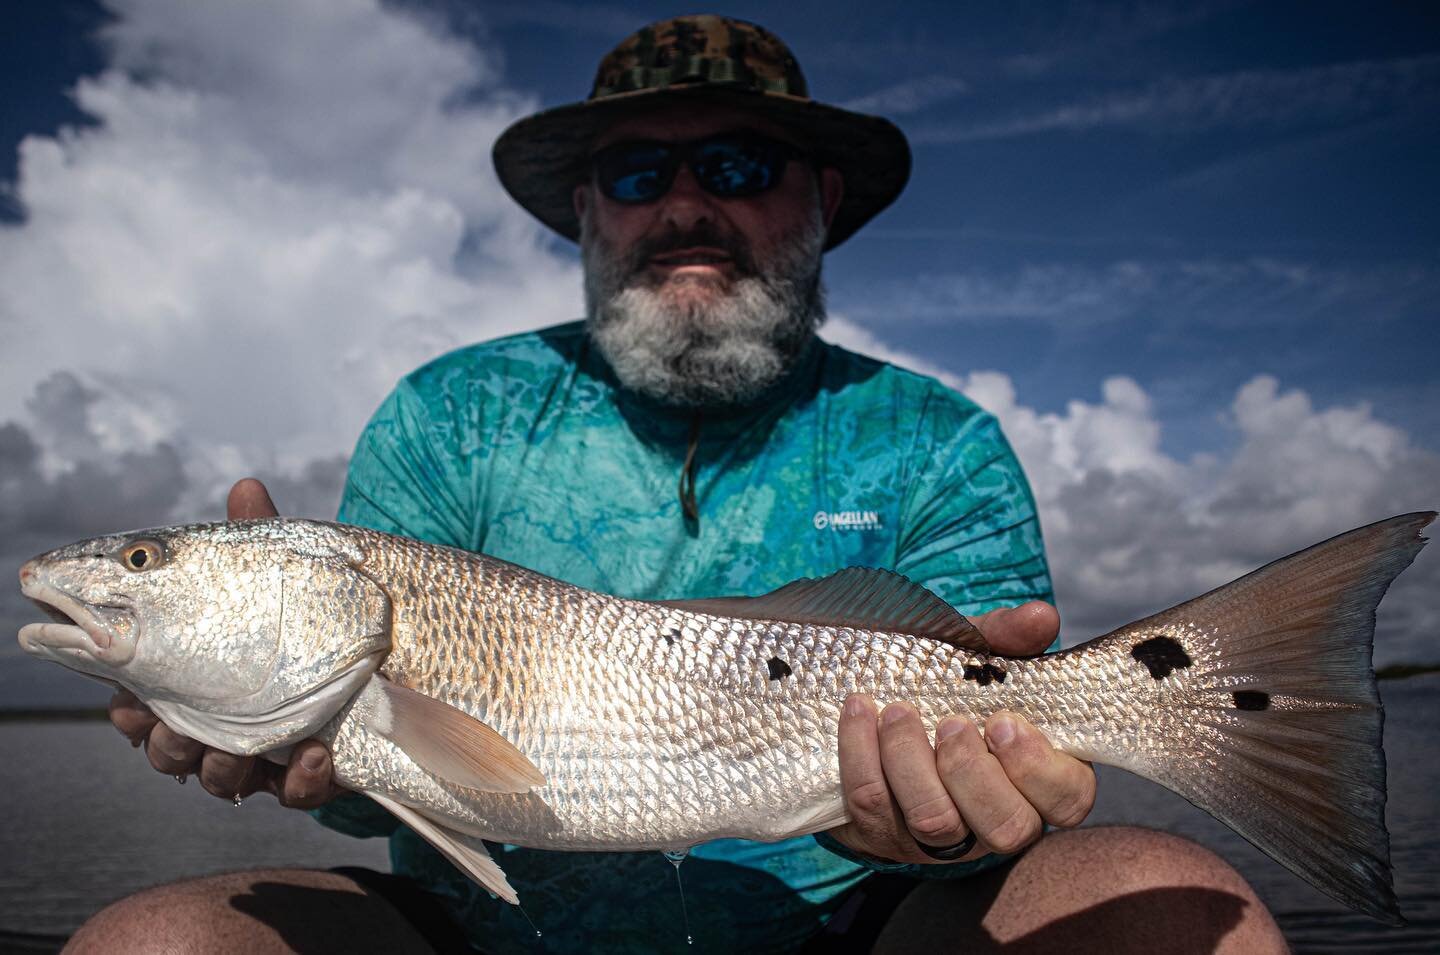 Redfish are a blast to catch, what&rsquo;s your favorite way to catch them? 
Grandslamfishing.com 
#Redfish #Snook #Flounder #Trout #Fishing